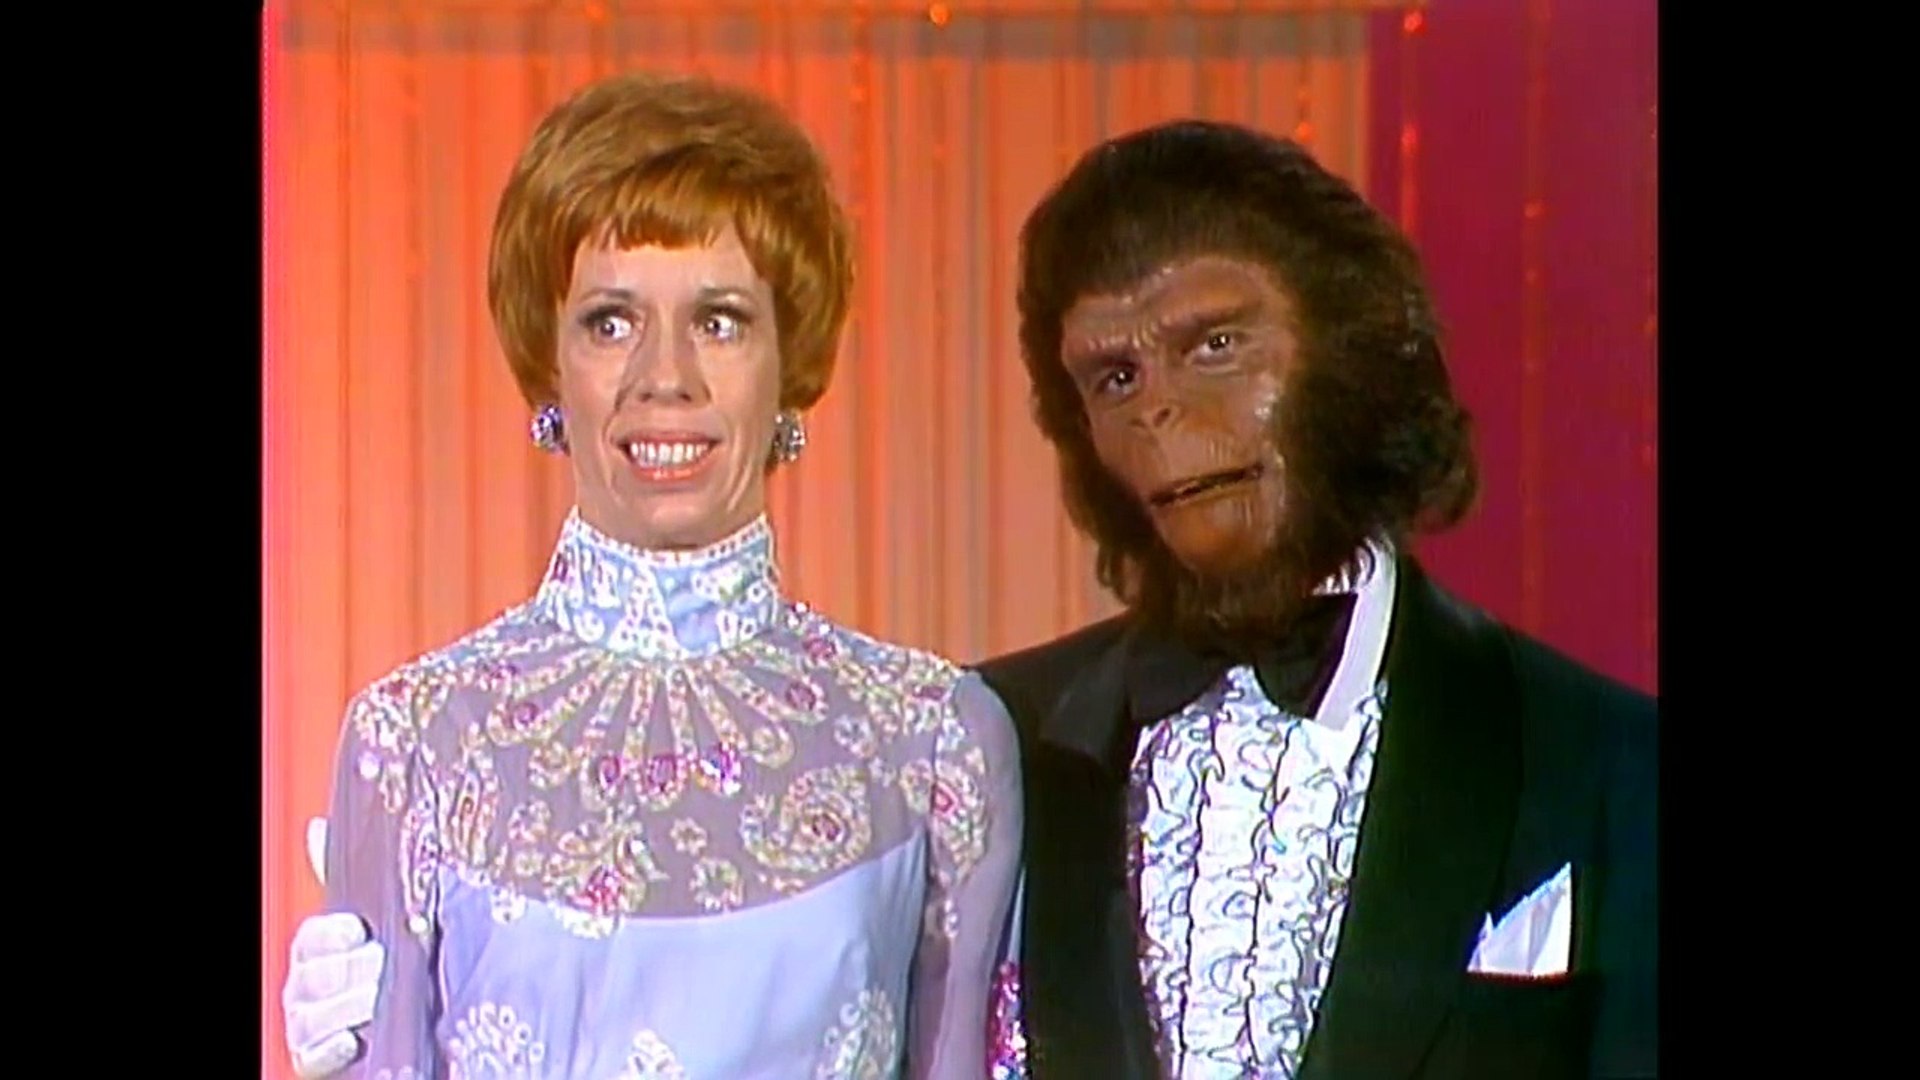 ⁣The Carol Burnett Show with Roddy McDowall wearing Planet of the Apes Makeup